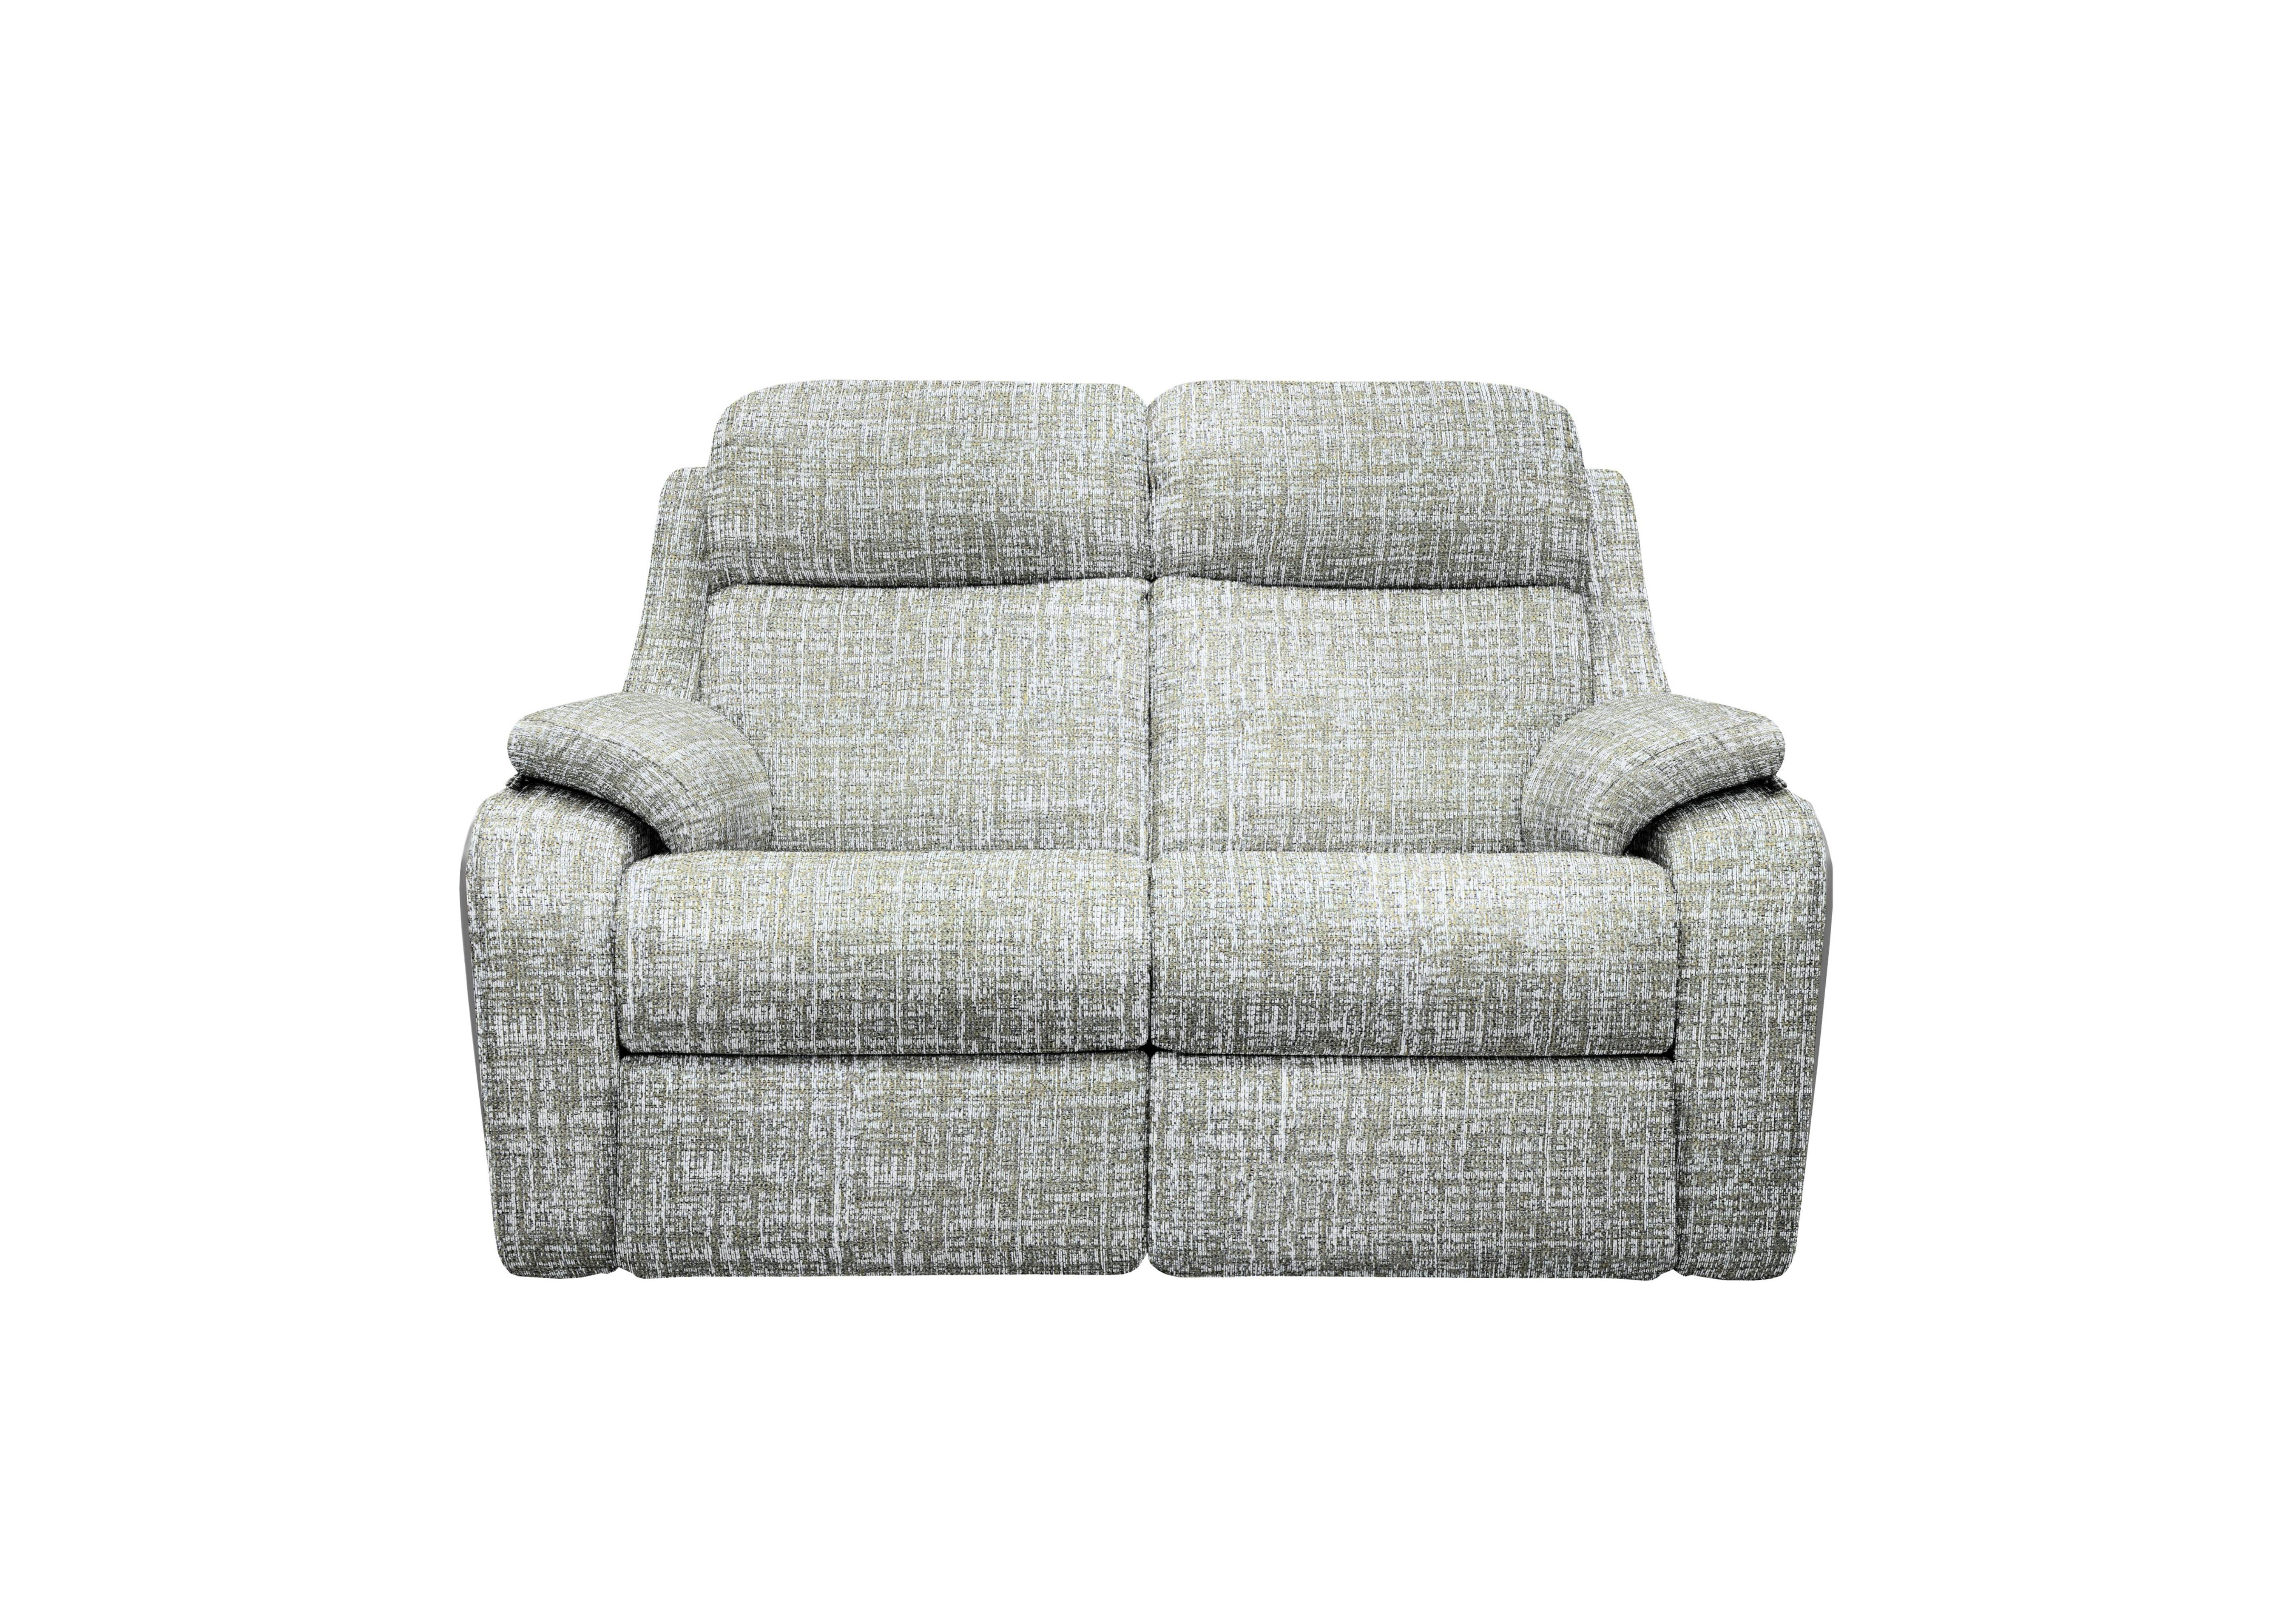 Kingsbury 2 Seater Fabric Power Recliner Sofa with Power Headrests in B102 Shore Oatmeal on Furniture Village